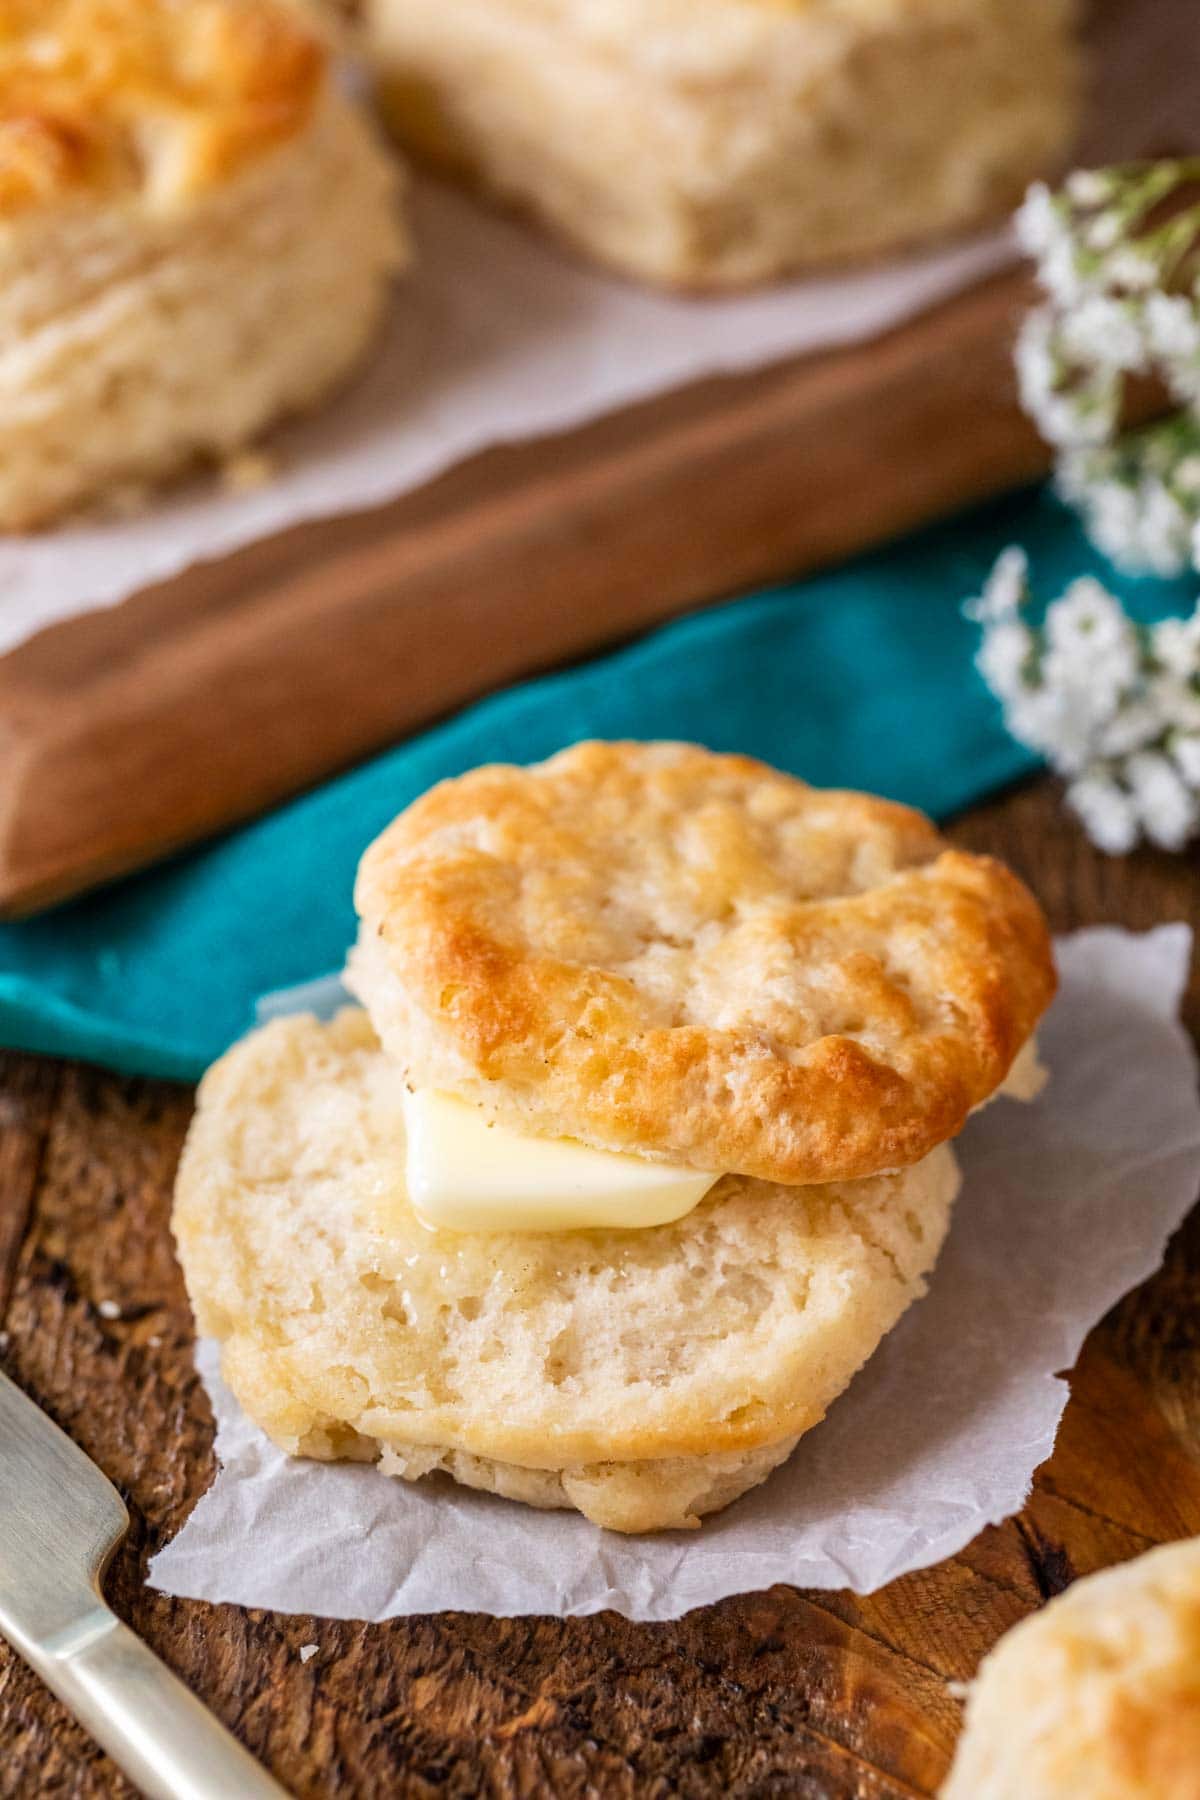 Golden brown biscuit that's been cut in half and topped with butter.